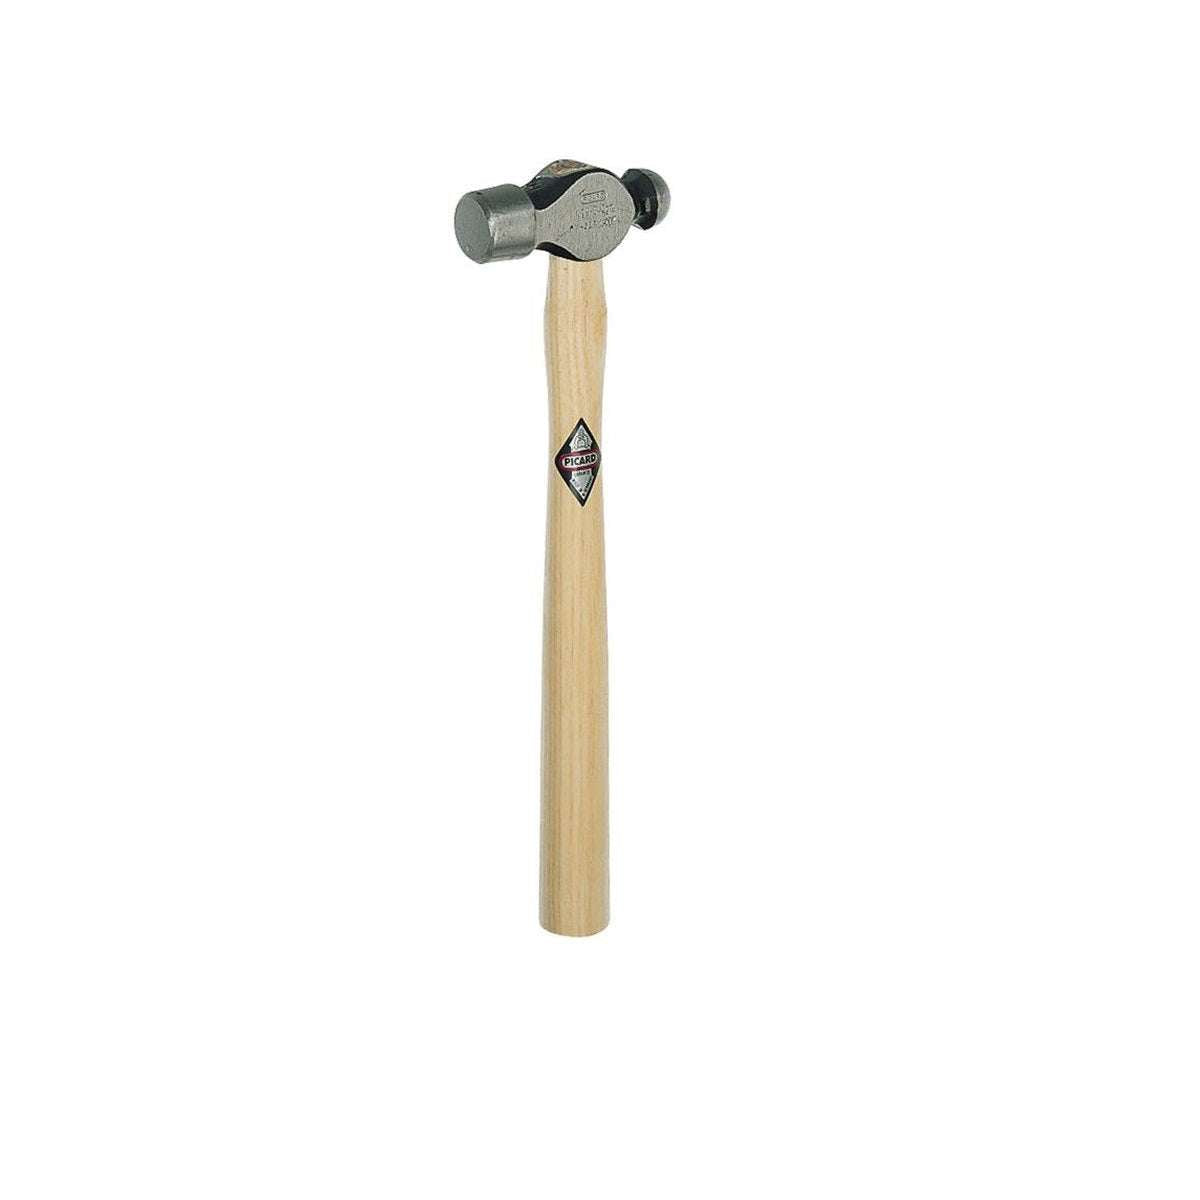 Ball peen hammer for boilermakers and tinsmiths 340g grey - Picard